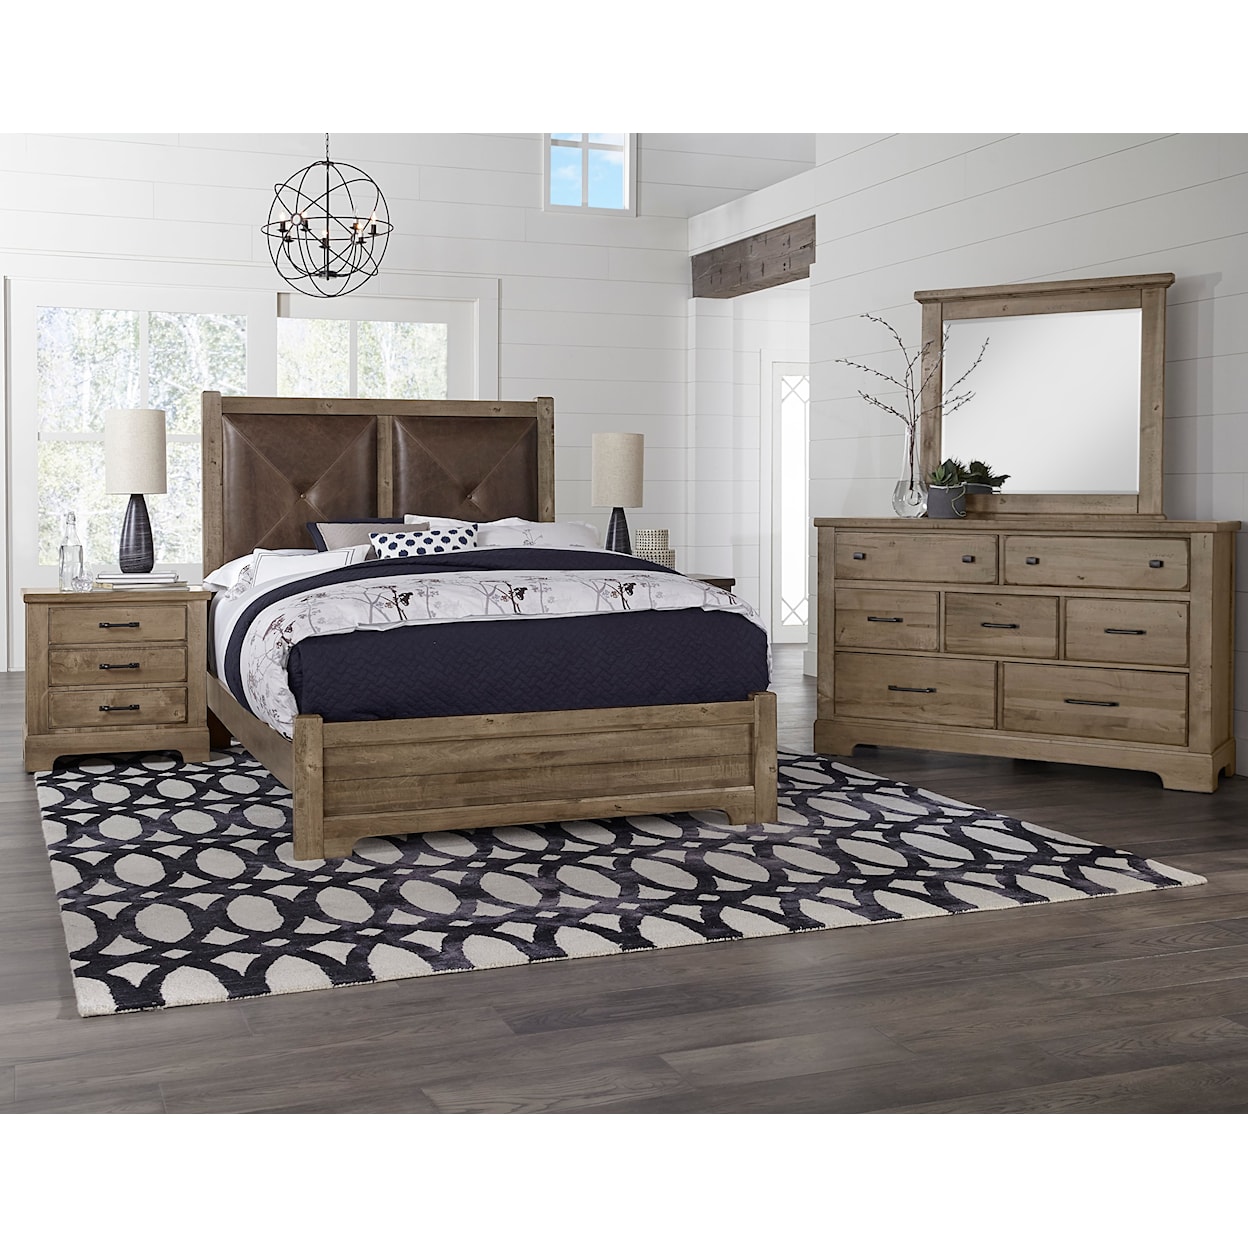 Vaughan Bassett Cool Rustic Queen Panel Bed with Leather Headboard